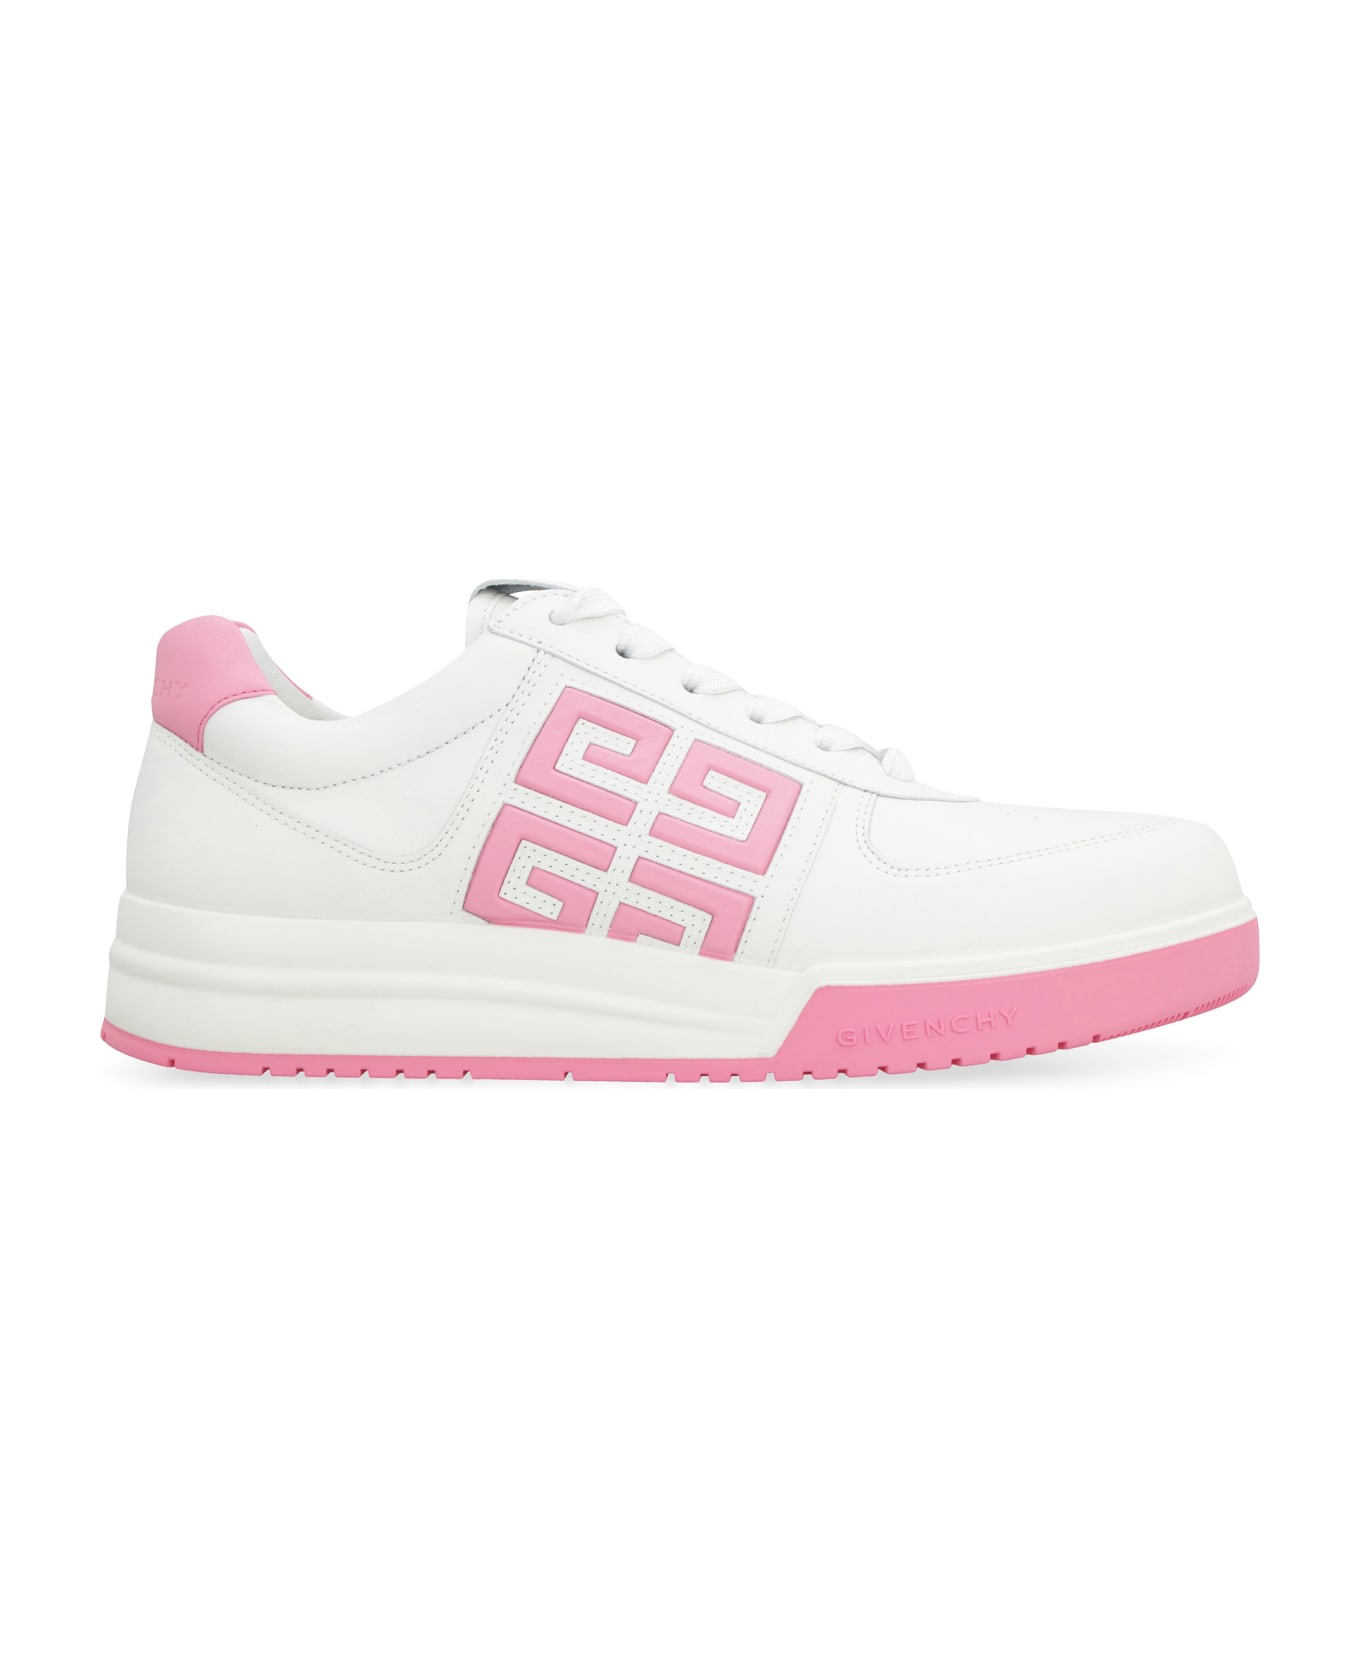 Givenchy G4 Low-top Sneakers - Pink